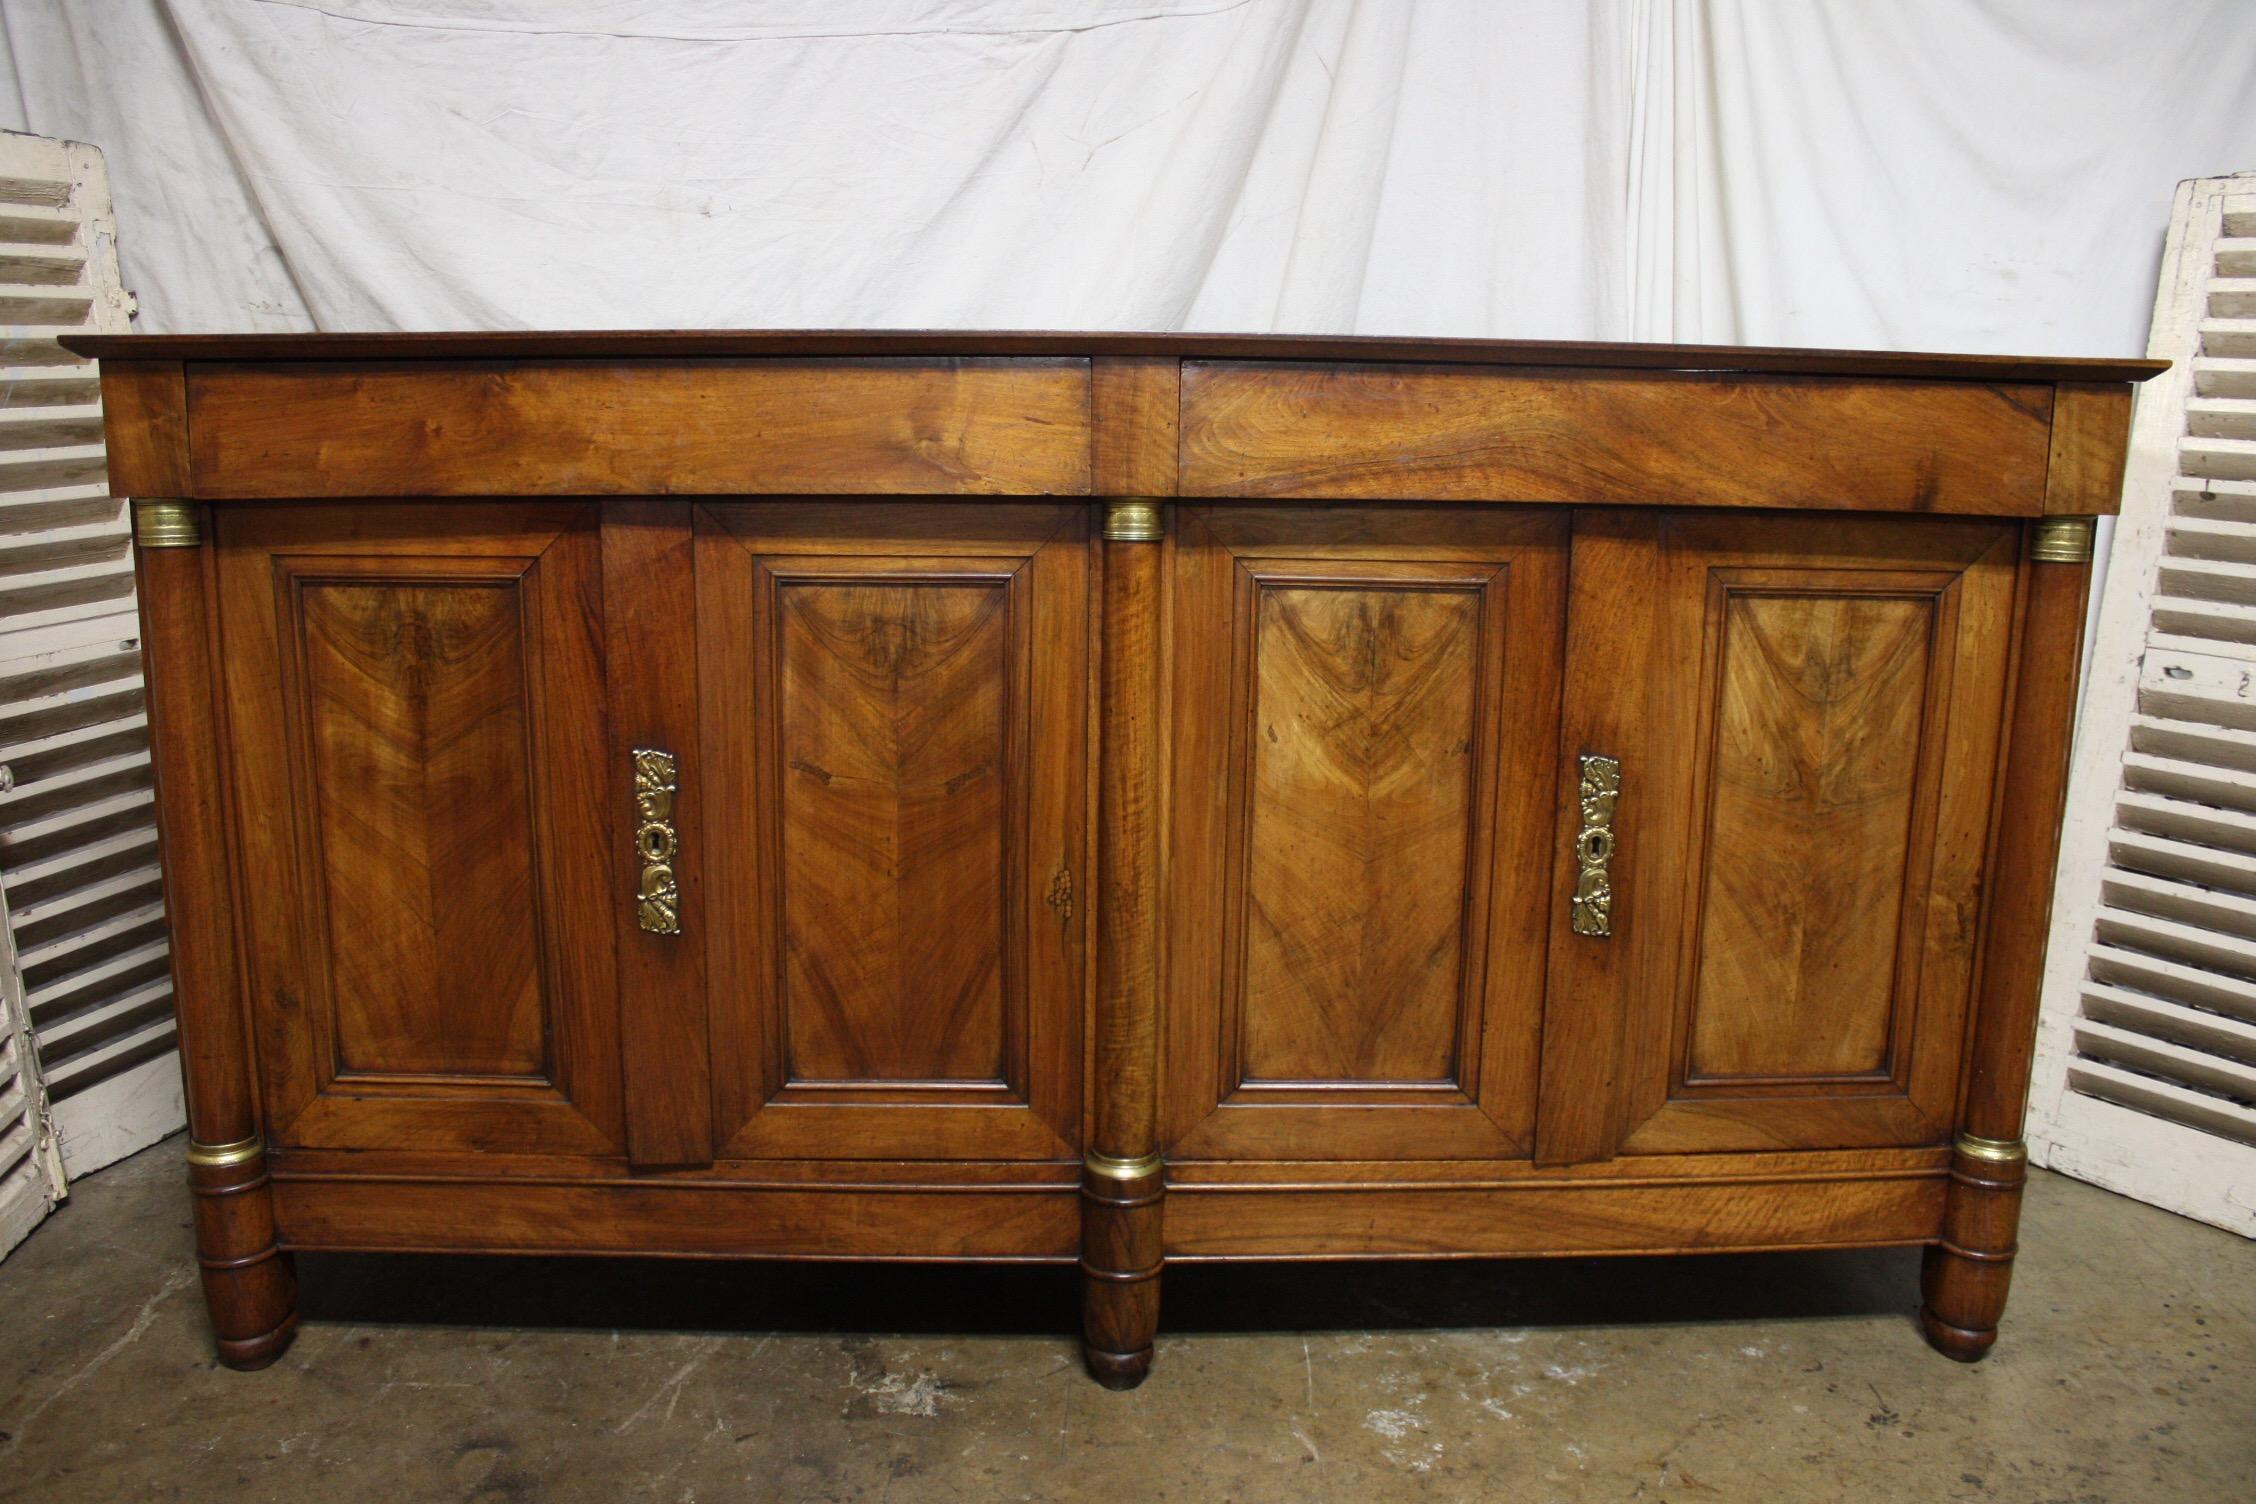 French Empire period sideboard.